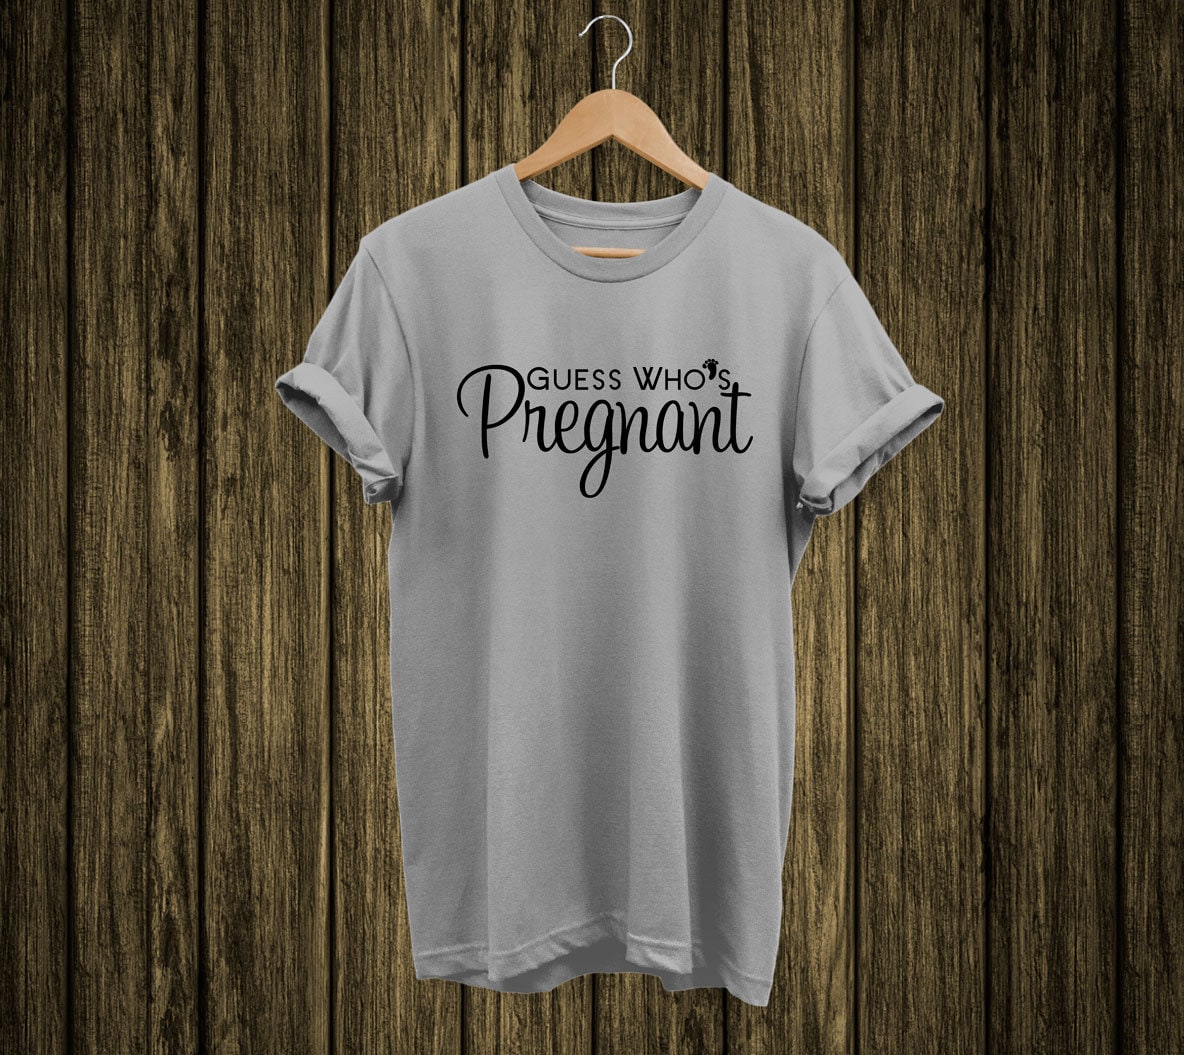 Gues Whos Coming to Town Funny Pregnant Unisex Hoodie